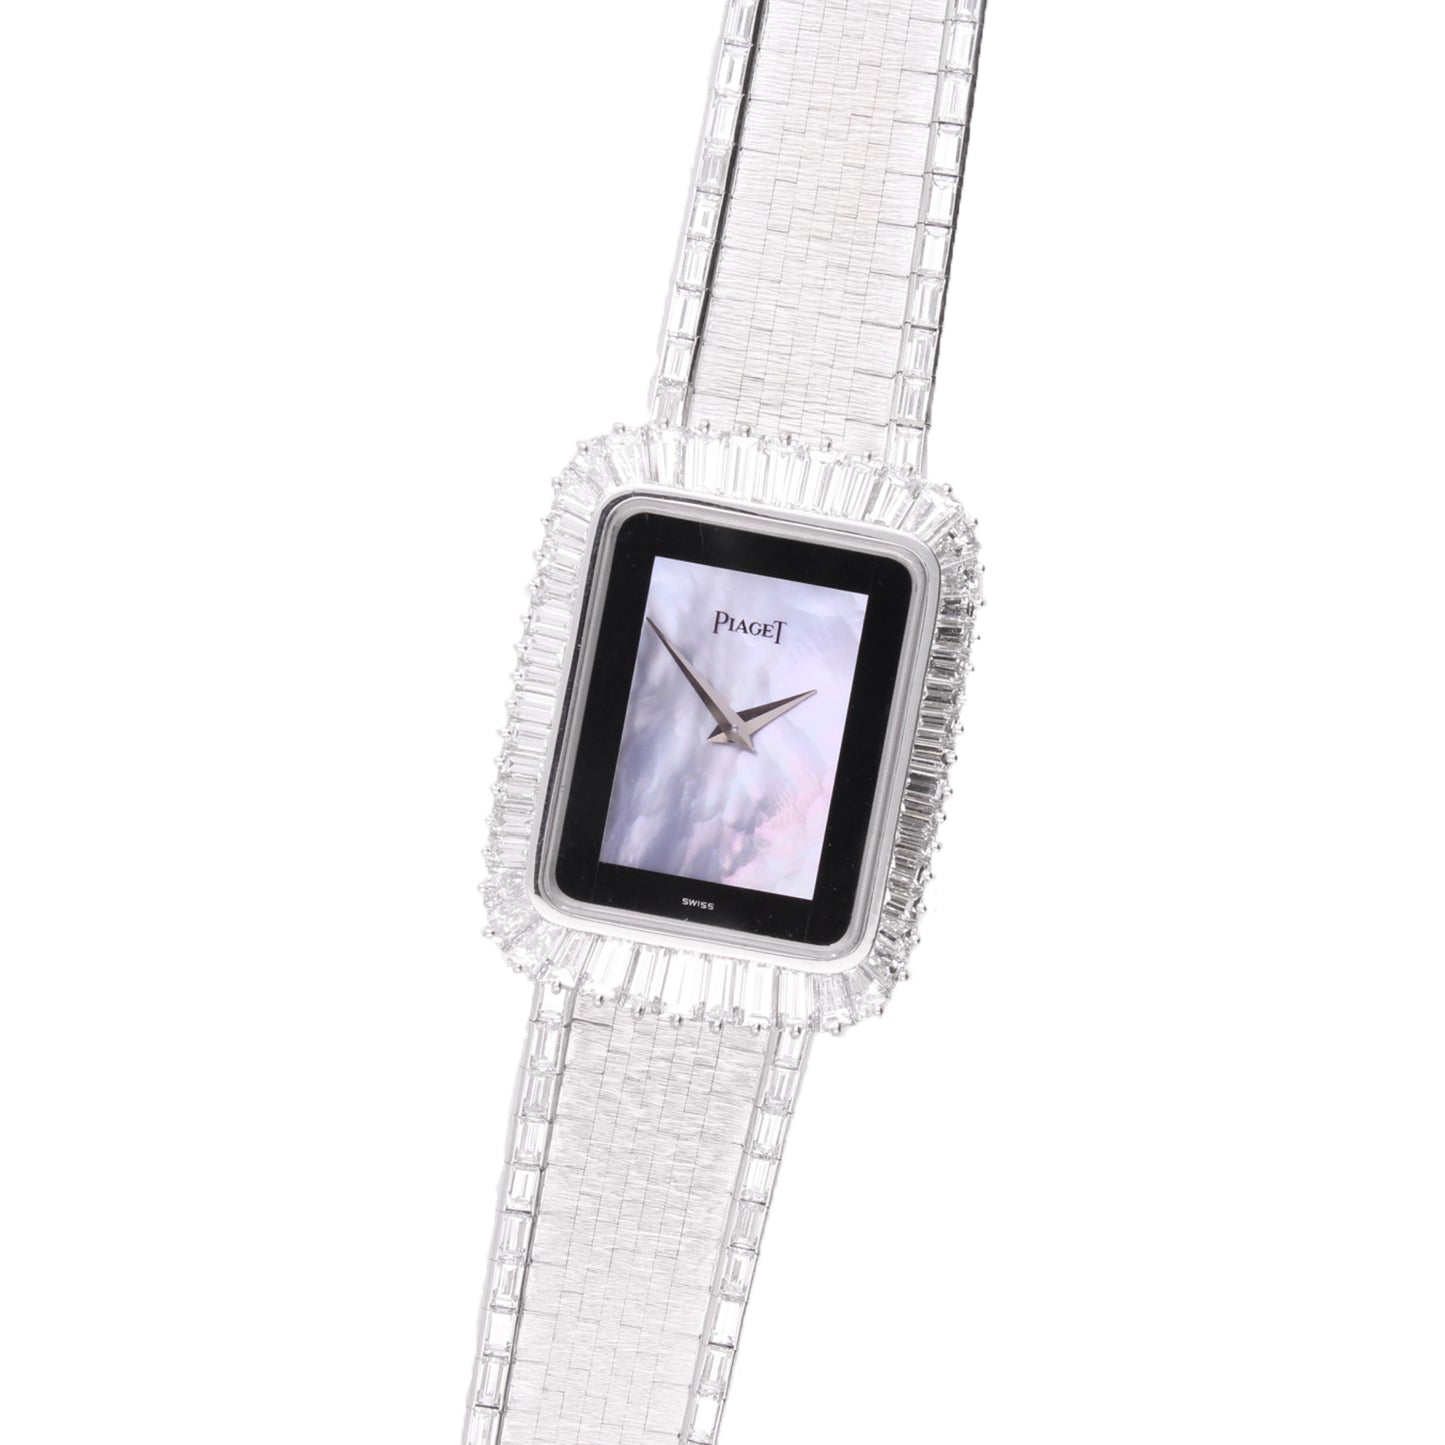 18ct white gold Piaget, mother of pearl and onyx dial diamond set bracelet watch. Made 1975